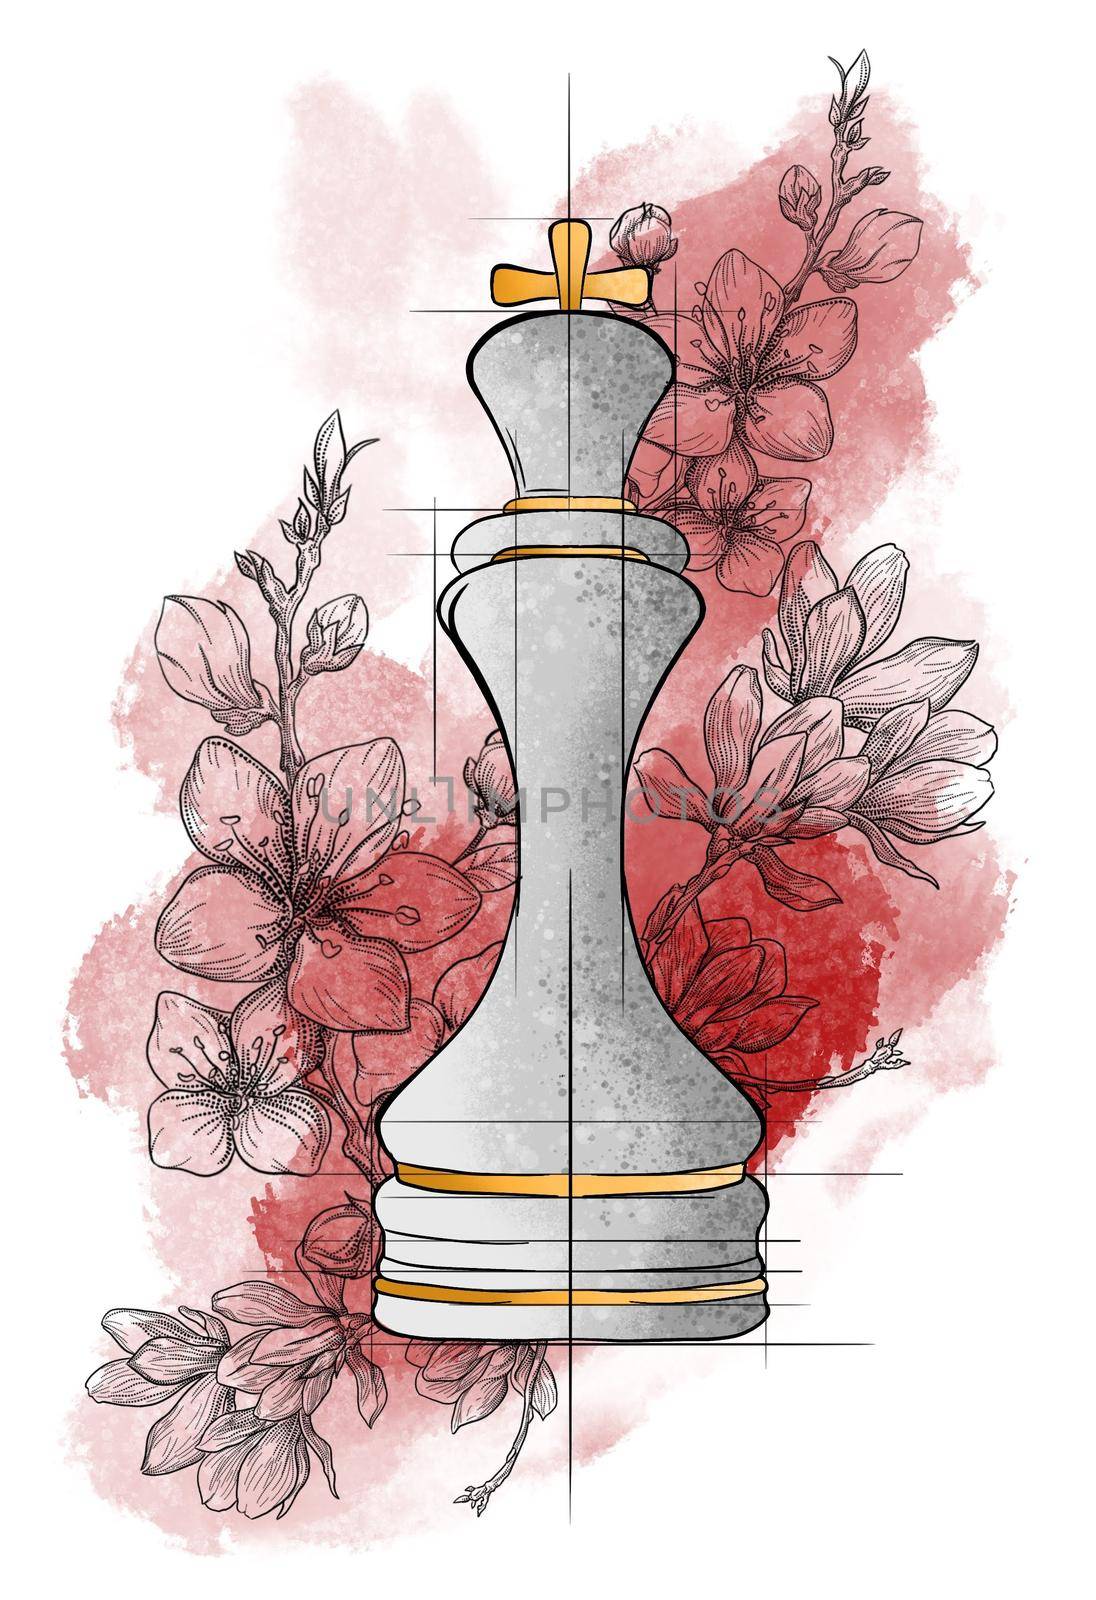 main chess piece white king in flowers art